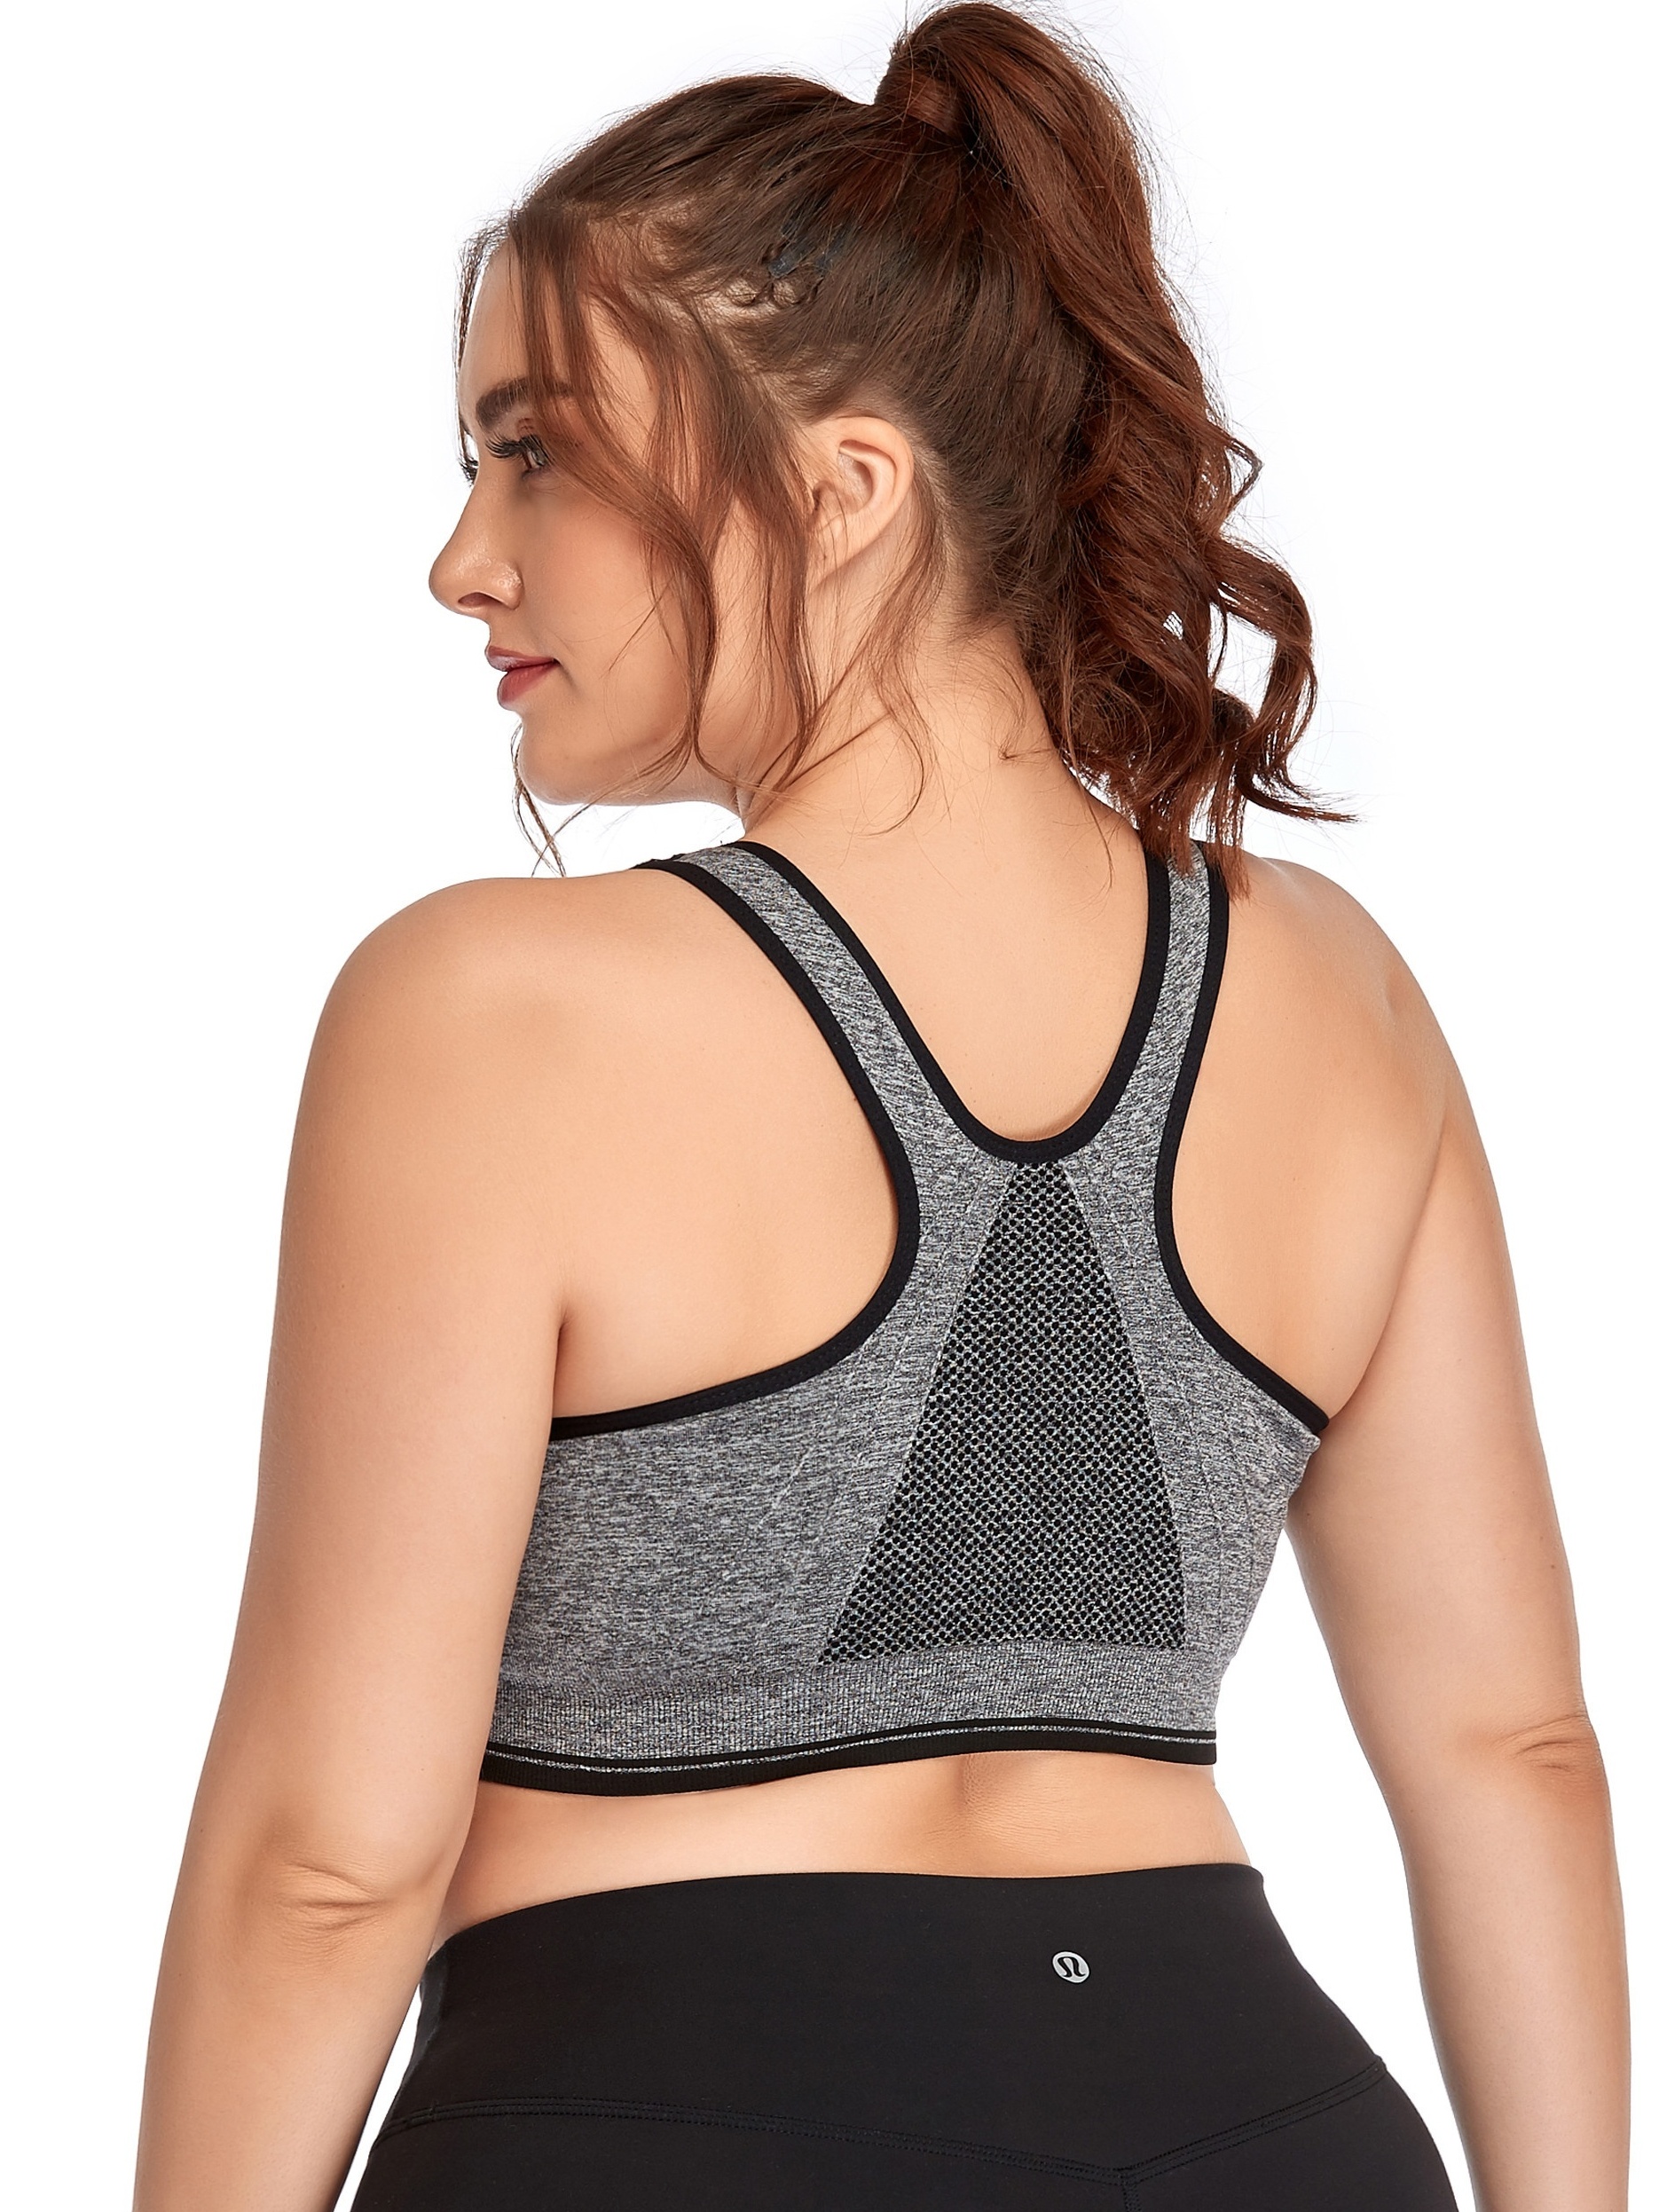 Womens Plus Size Sports Bras Non-Wired Removable Padded Medium